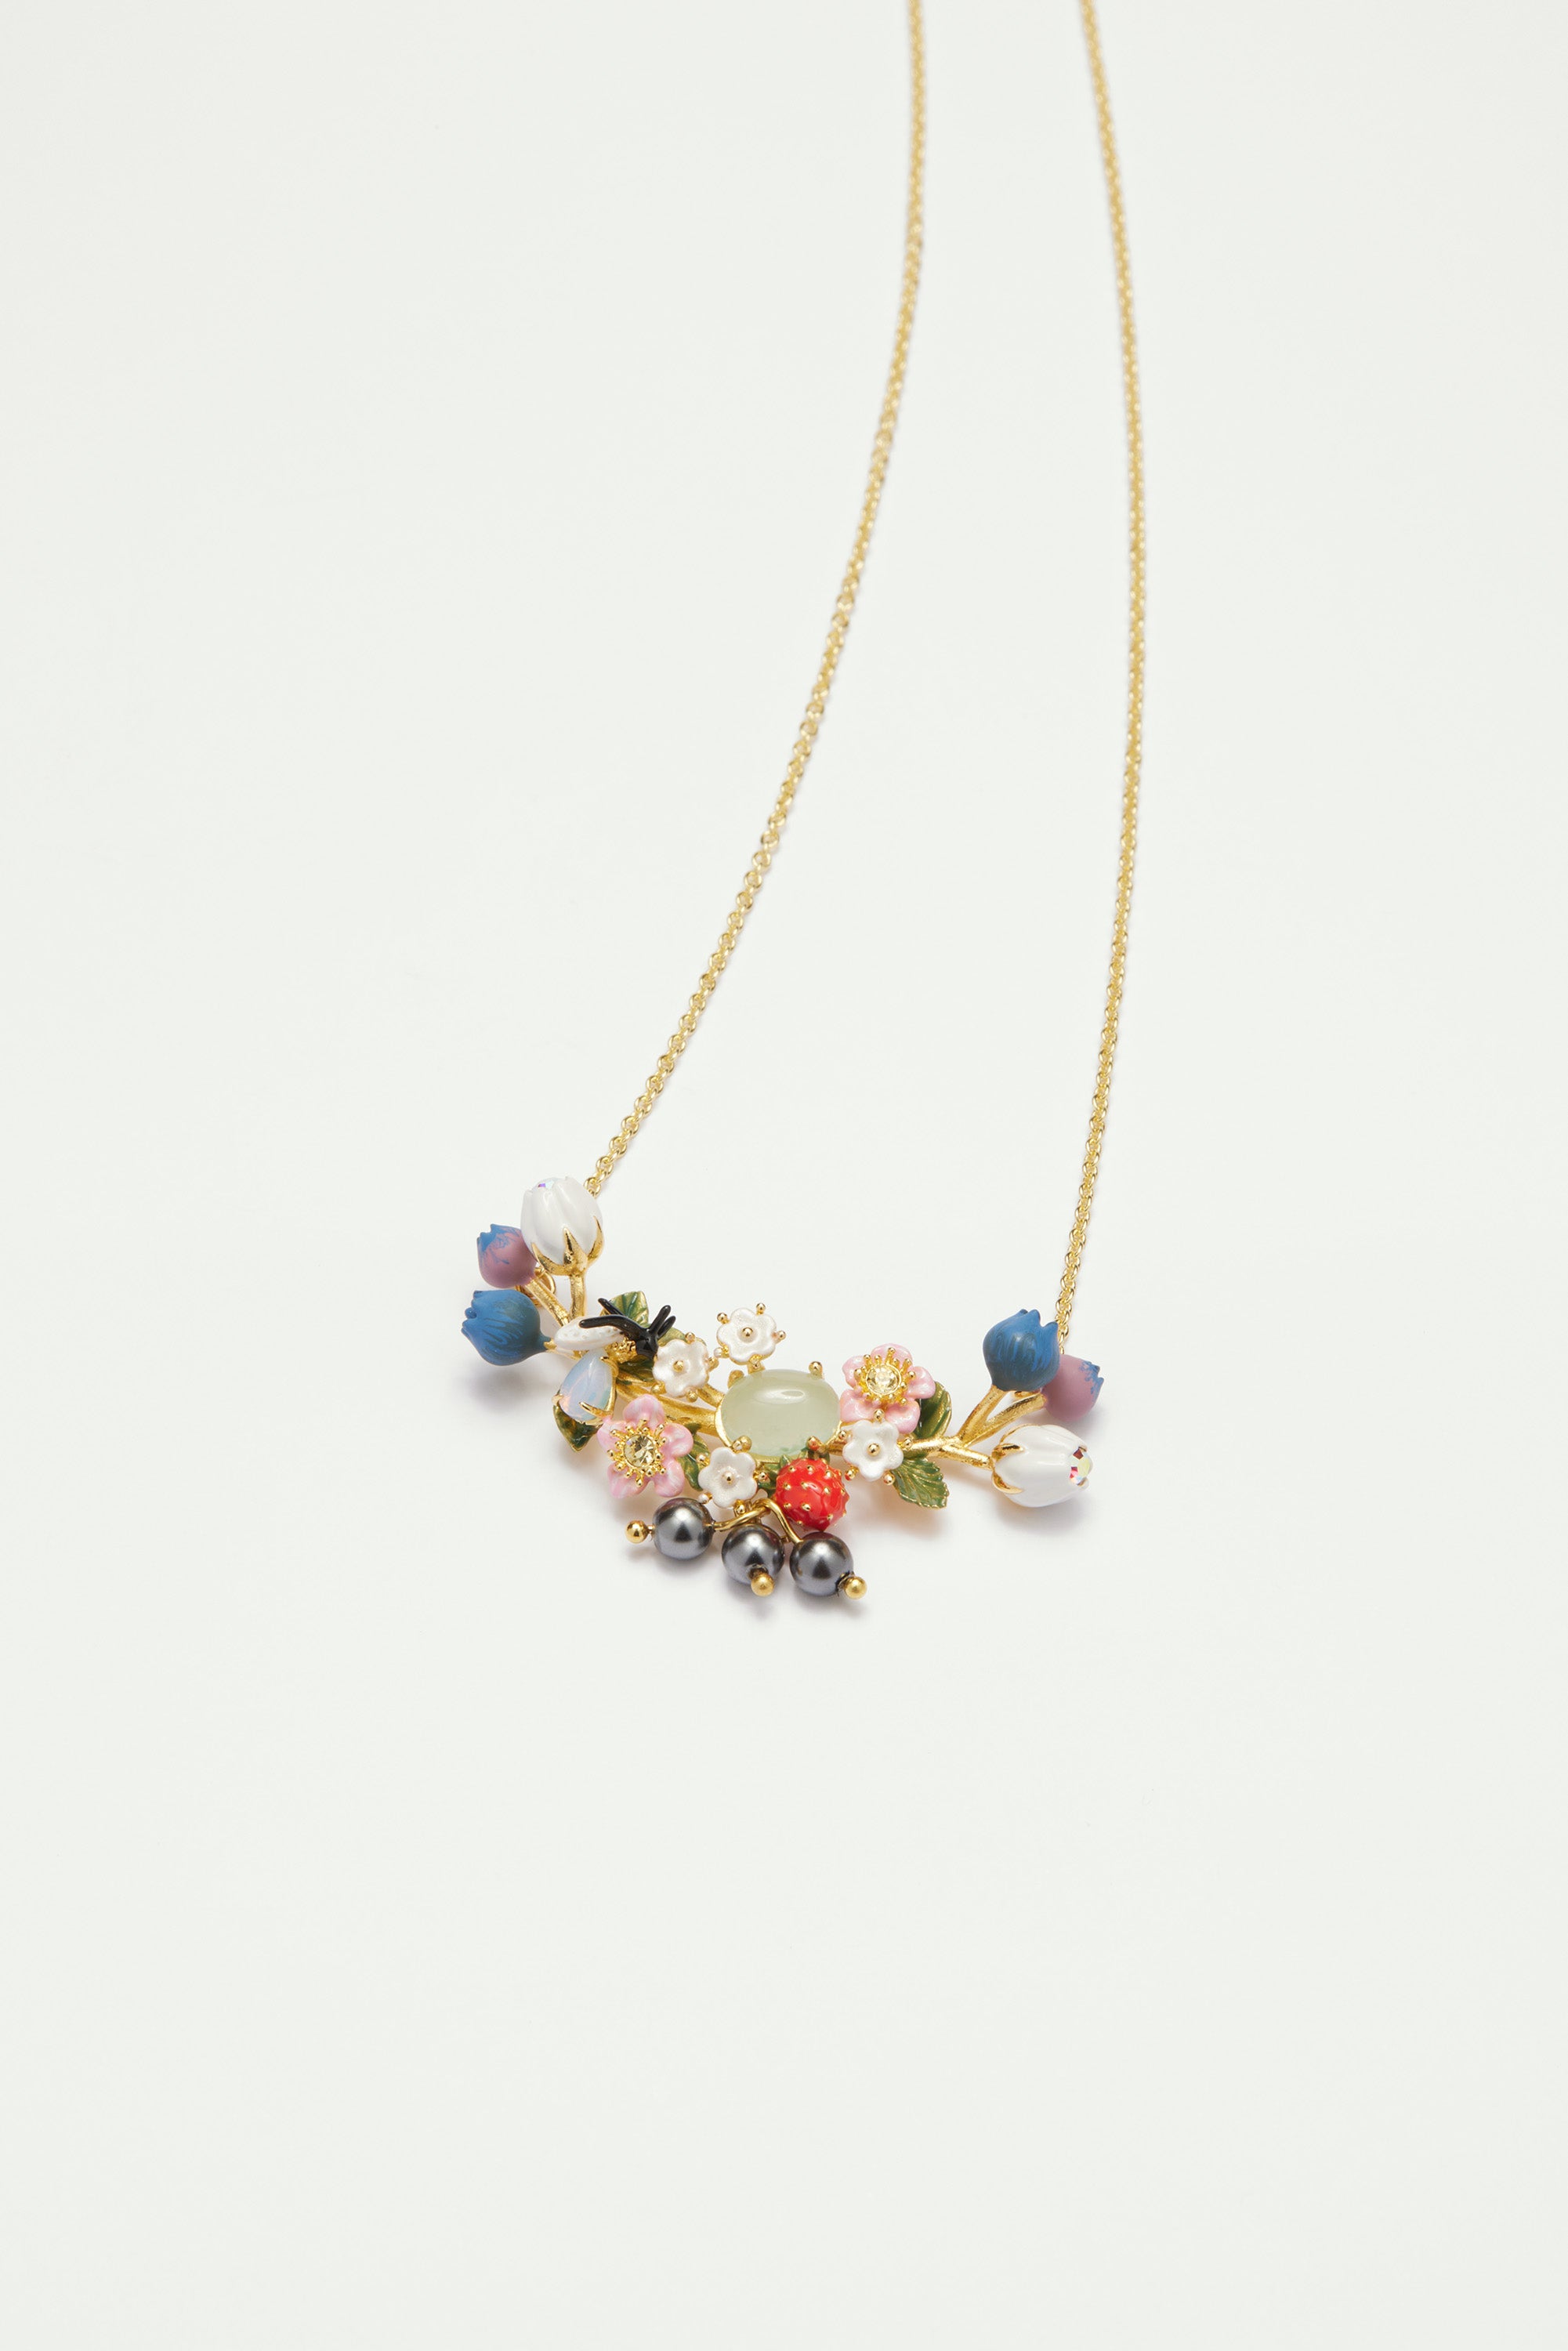 Blueberry, firefly and round cut stone statement necklace